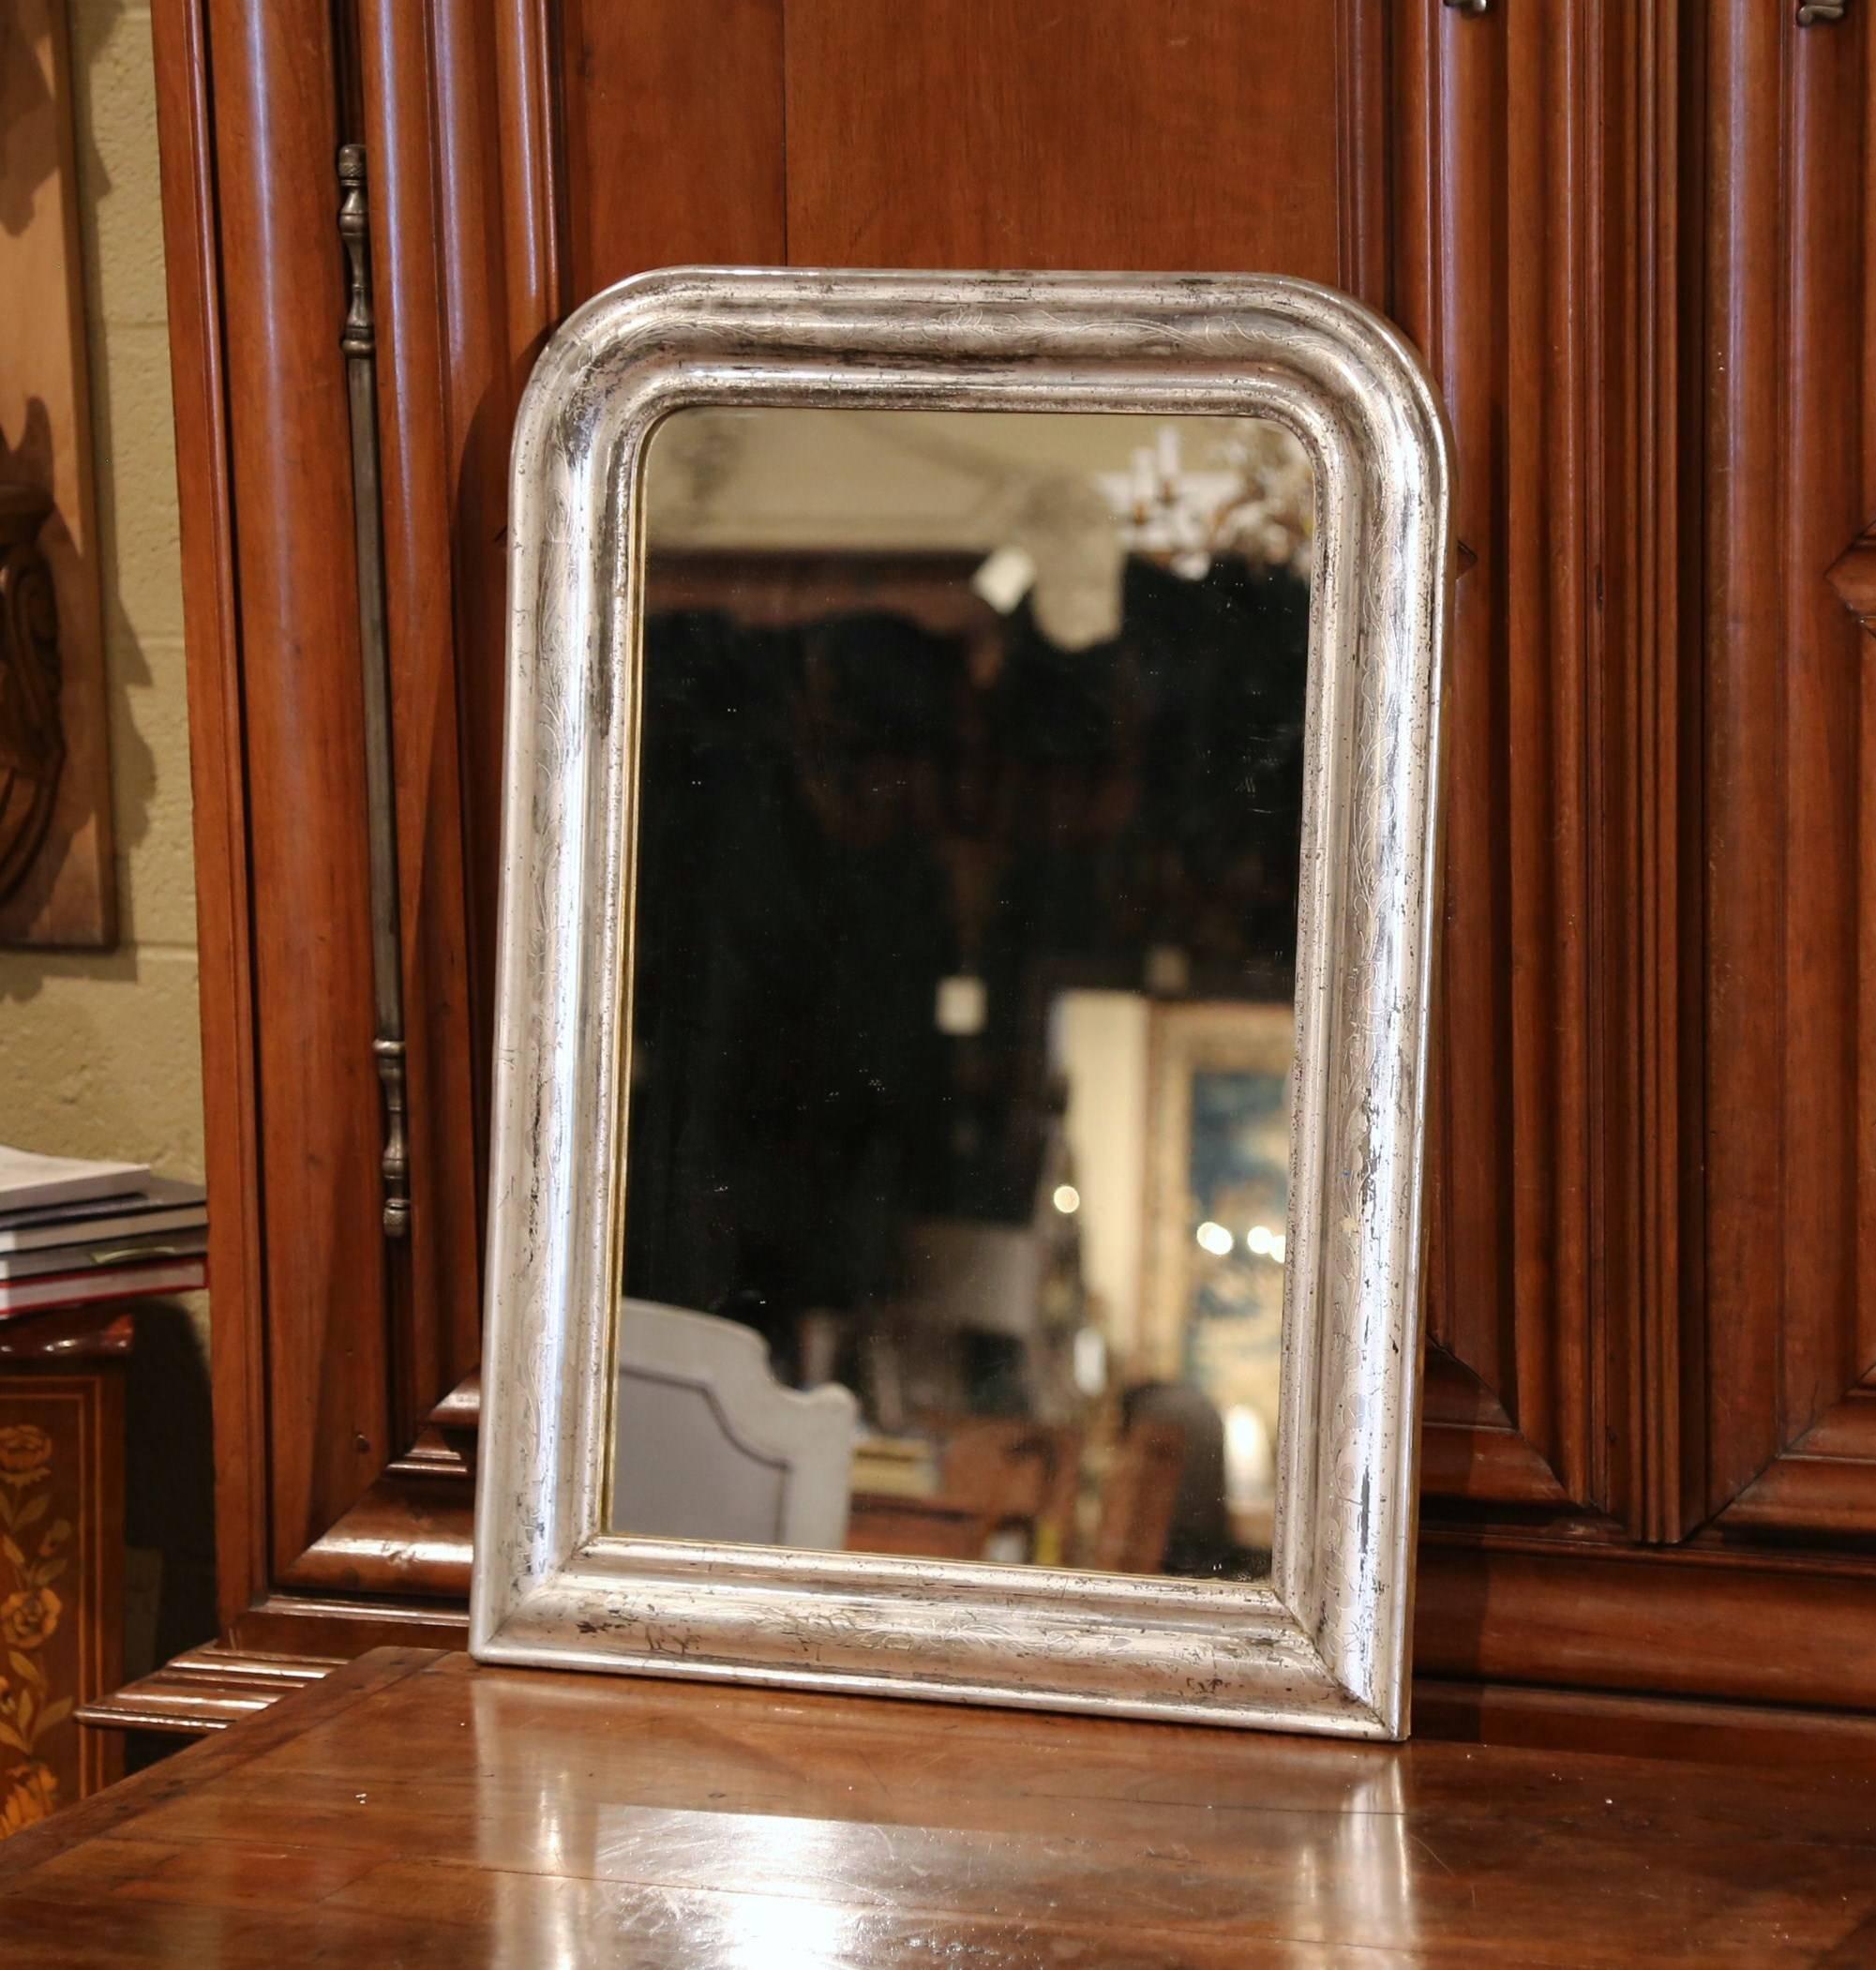 This elegant, antique mirror was crafted in France, circa 1860. Rectangular in shape, the small wall hanging mirror features discrete engraved floral motifs around the decorative, silver leaf frame. The traditional, Louis Philippe style piece is in